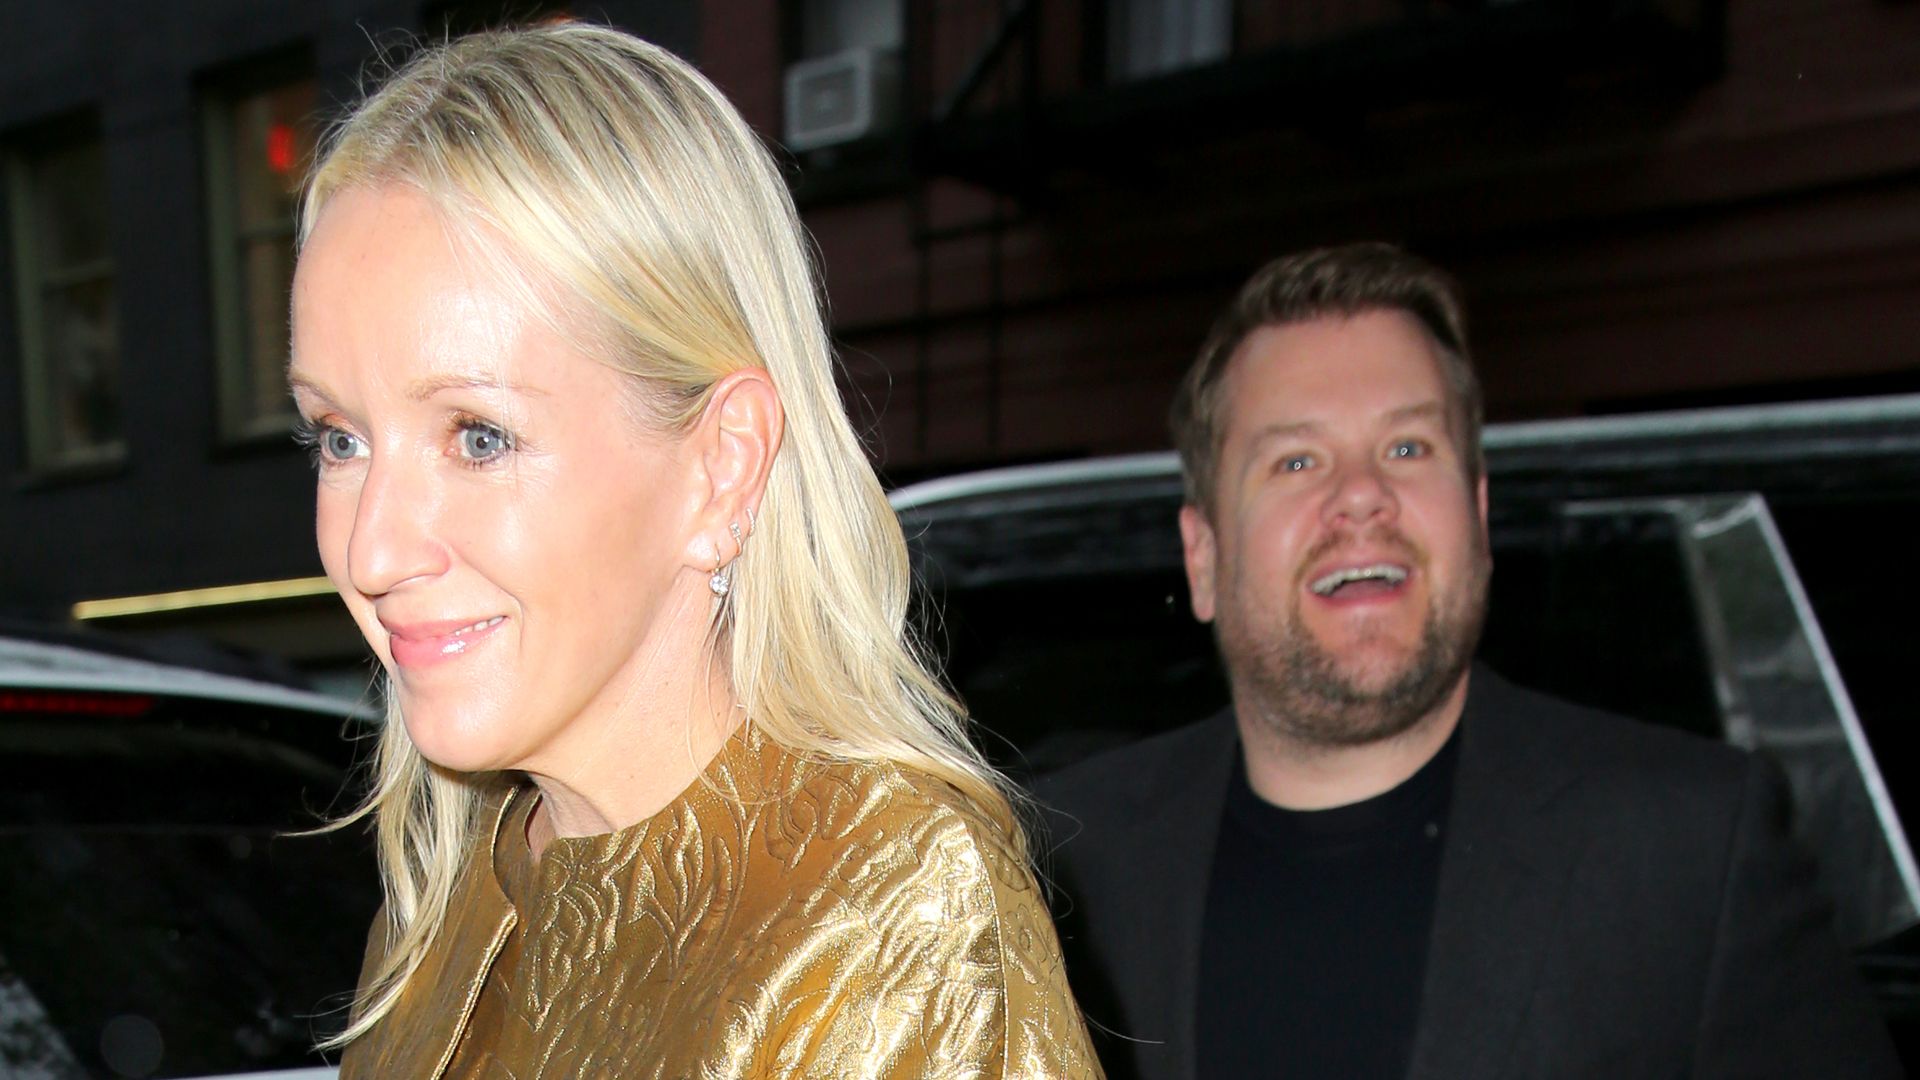 James Corden's rarely-seen wife stuns in gold mini dress - it'll make your jaw drop